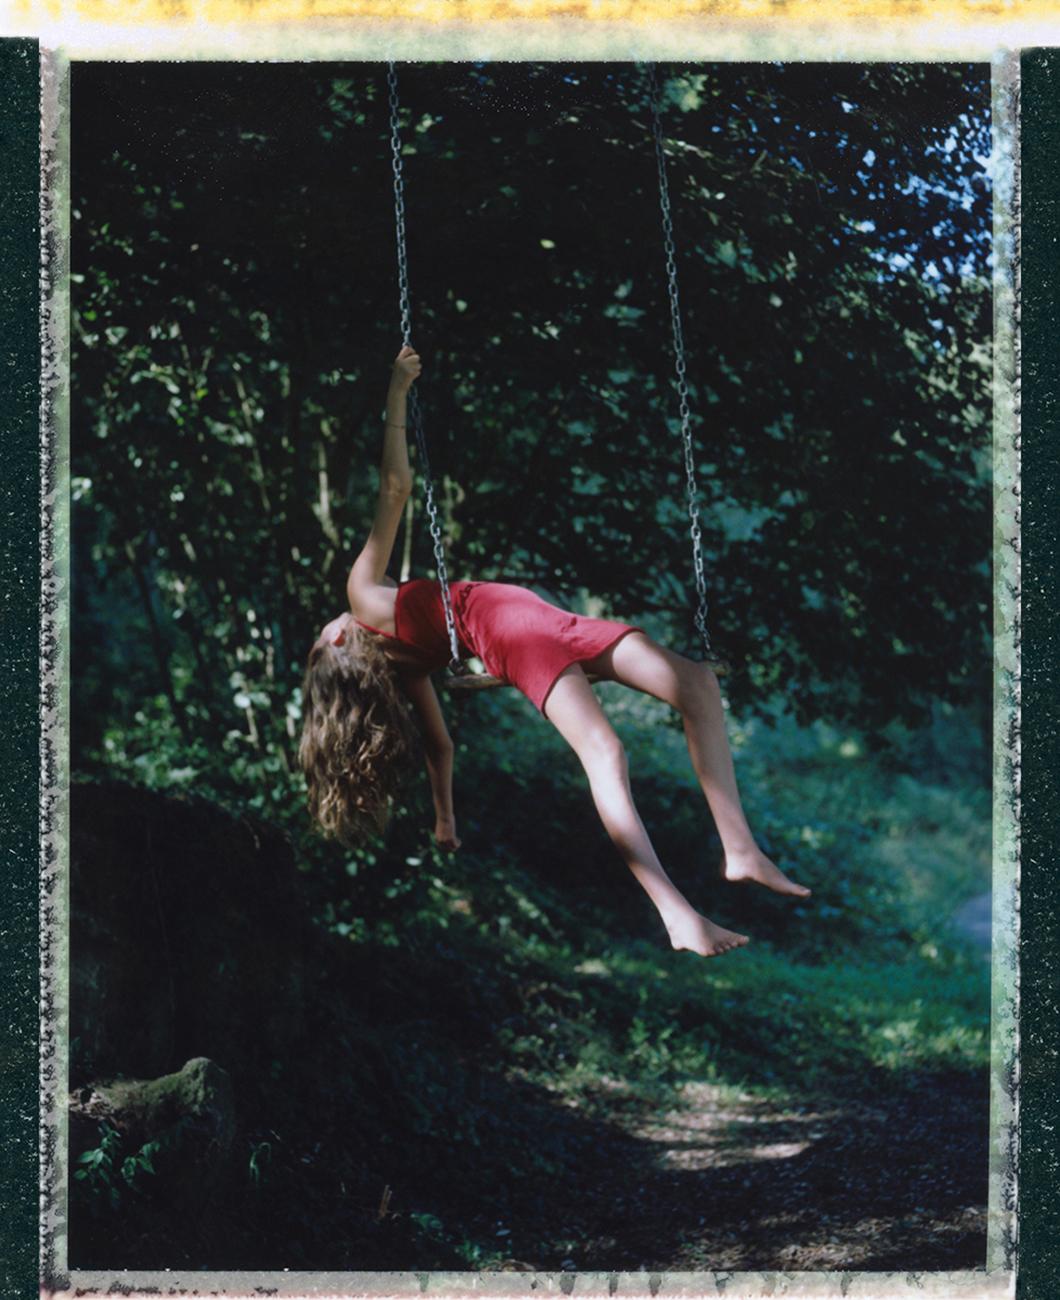 I swing to see the world upside down - Contemporary, Childhood